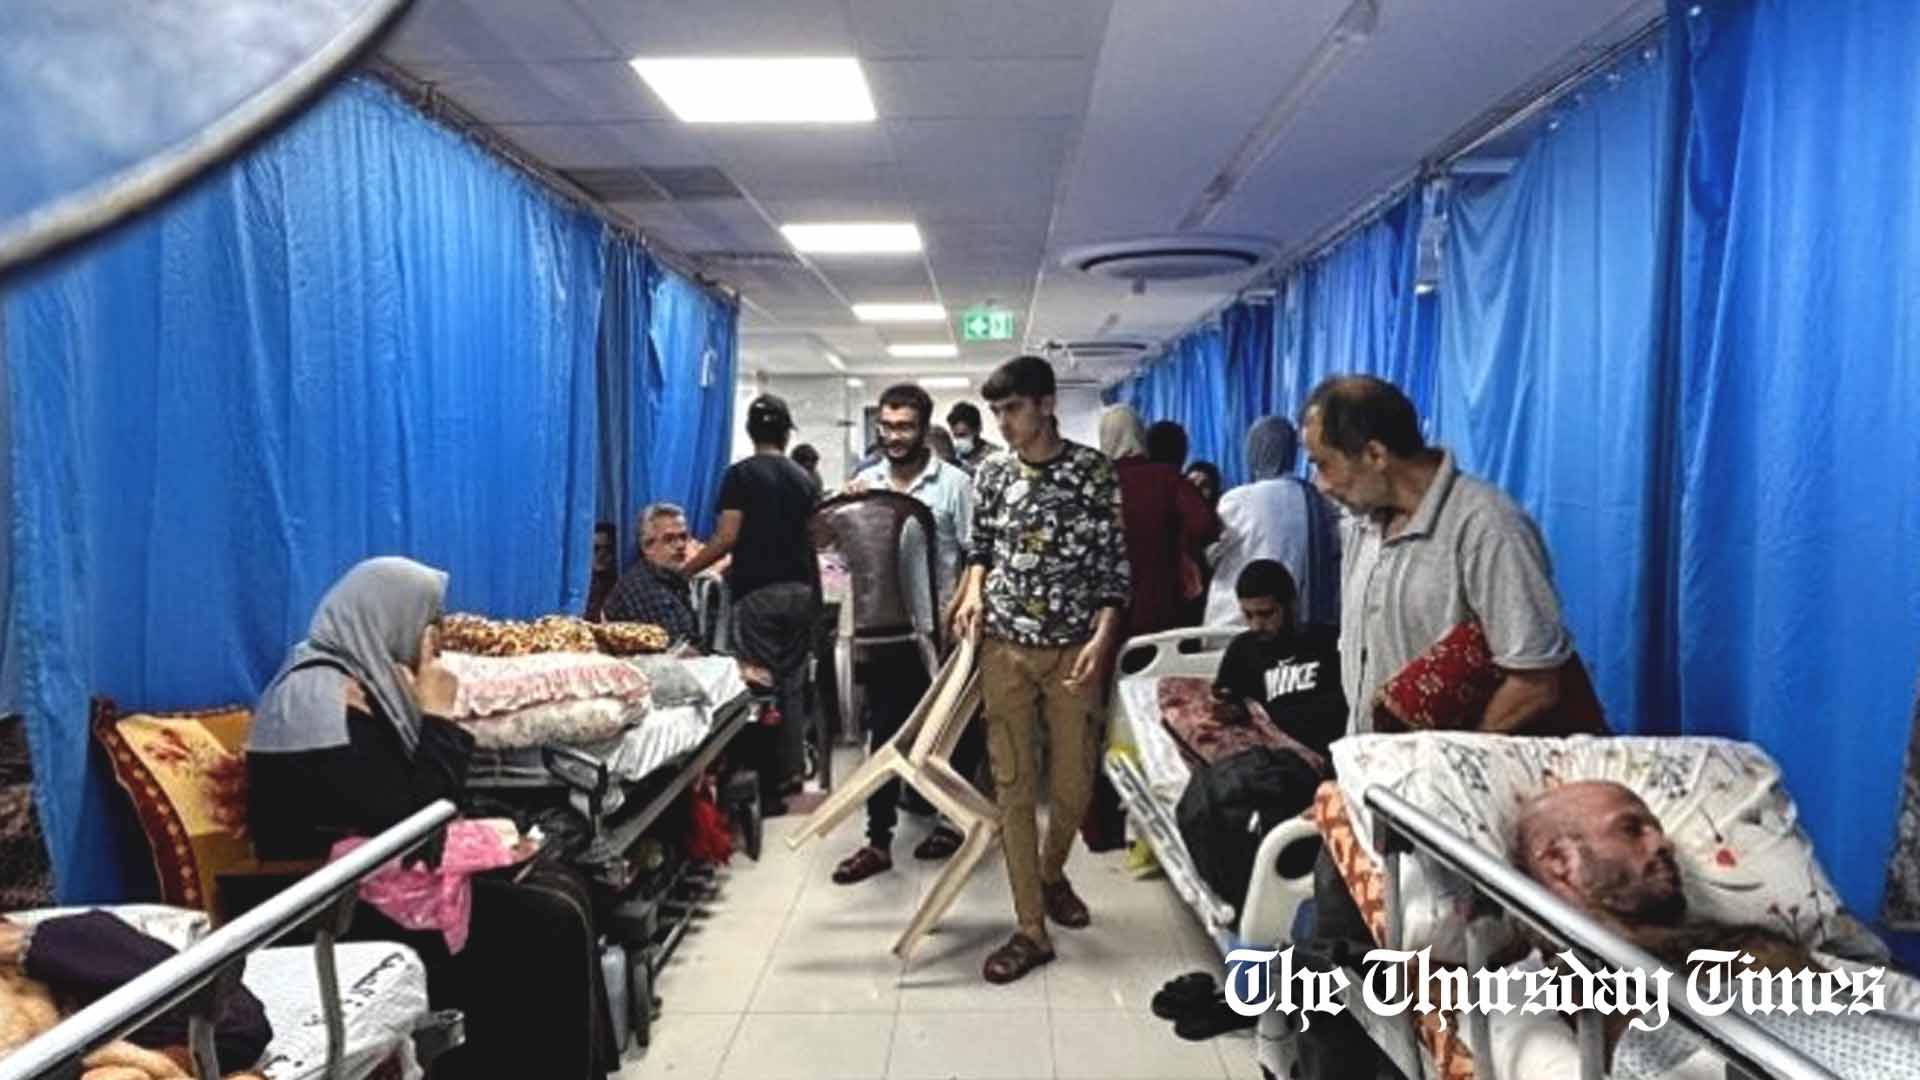 The intensive care unit of Gaza's largest hospital, al-Shifa Hospital, is shown. — FILE